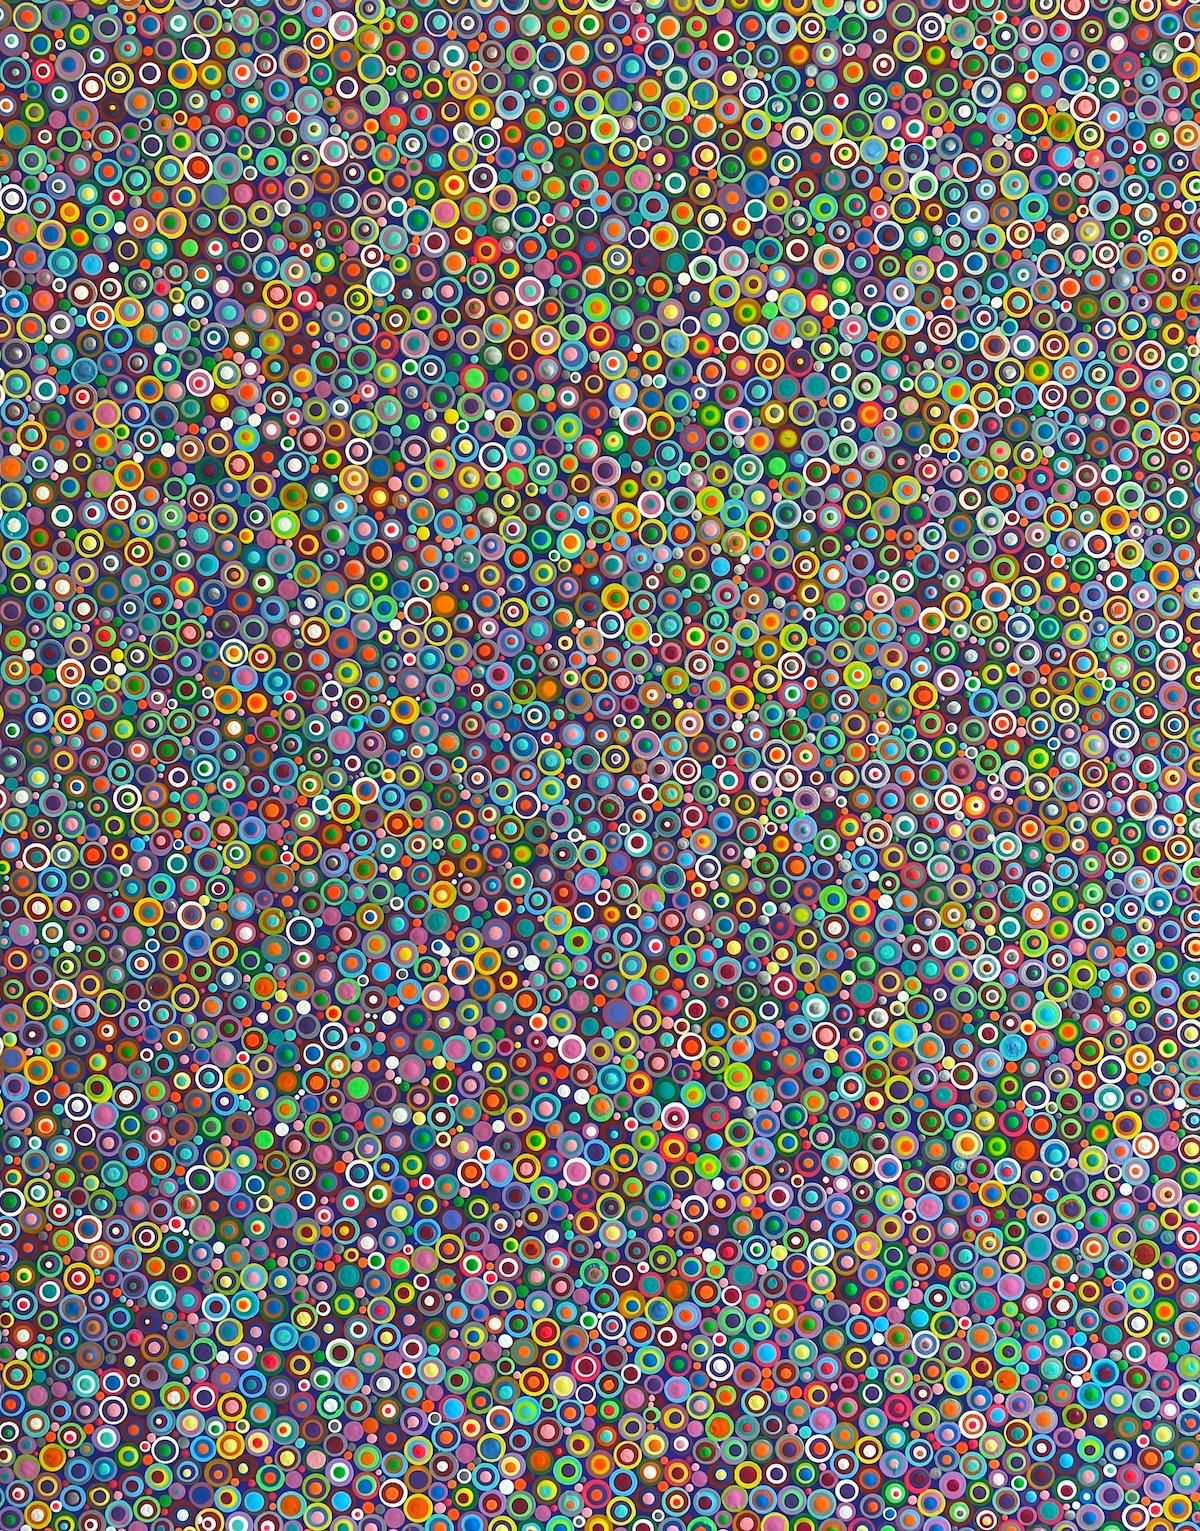 What is a dot painting?